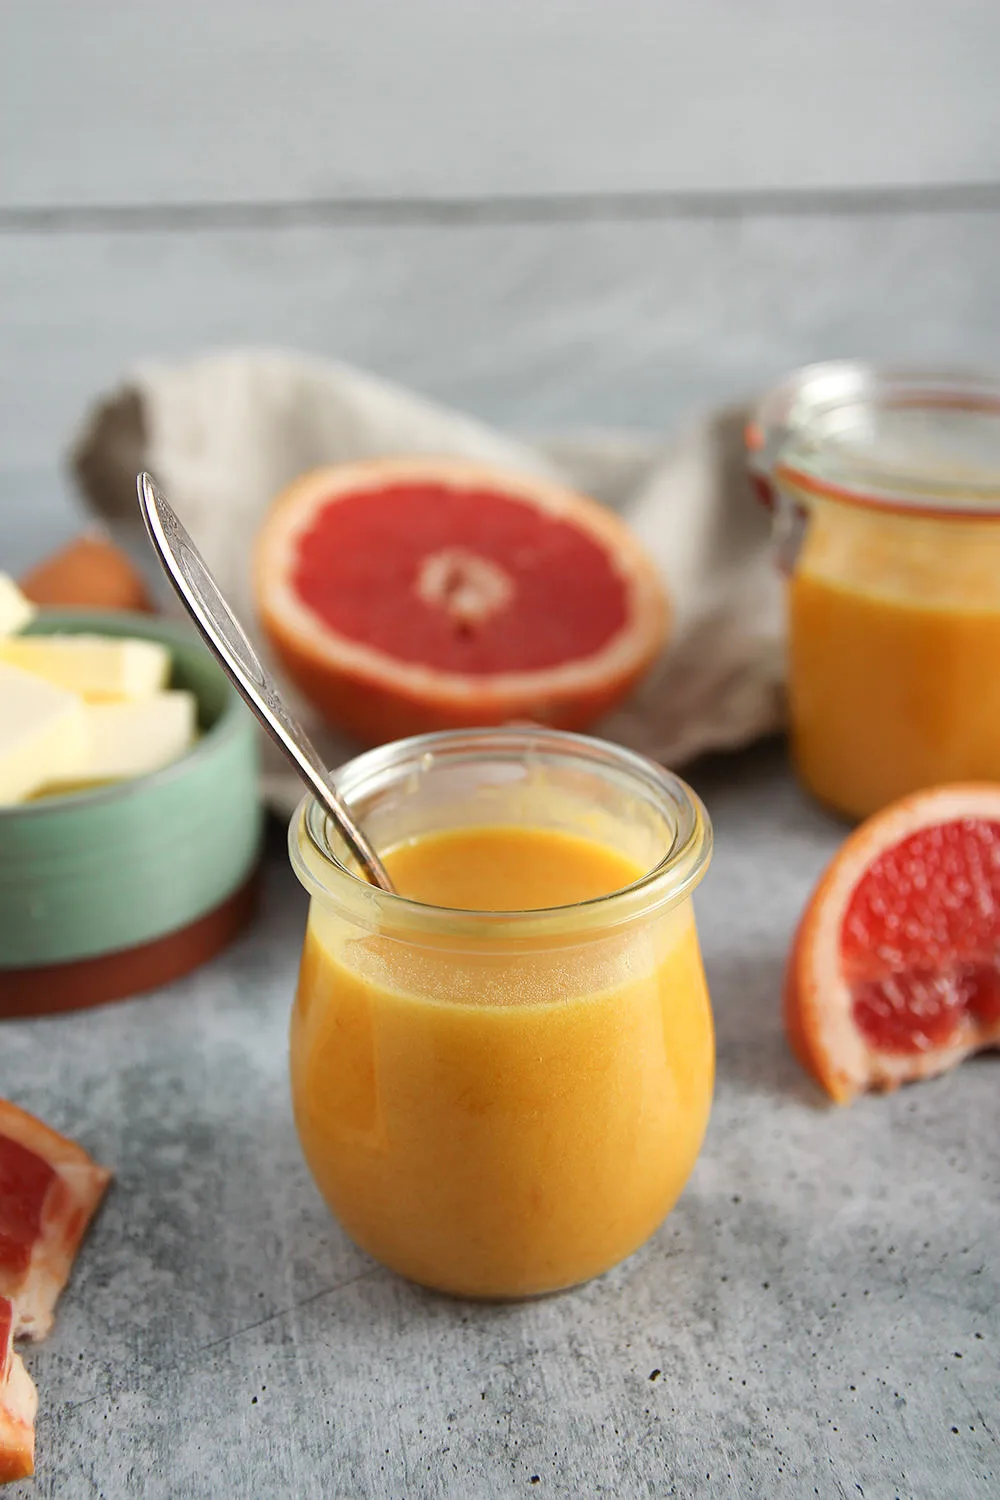 Grapefruit Curd is a great stand-in for lemon curd in any number of recipes! Make it with just a few ingredients, including tart ruby grapefruit.